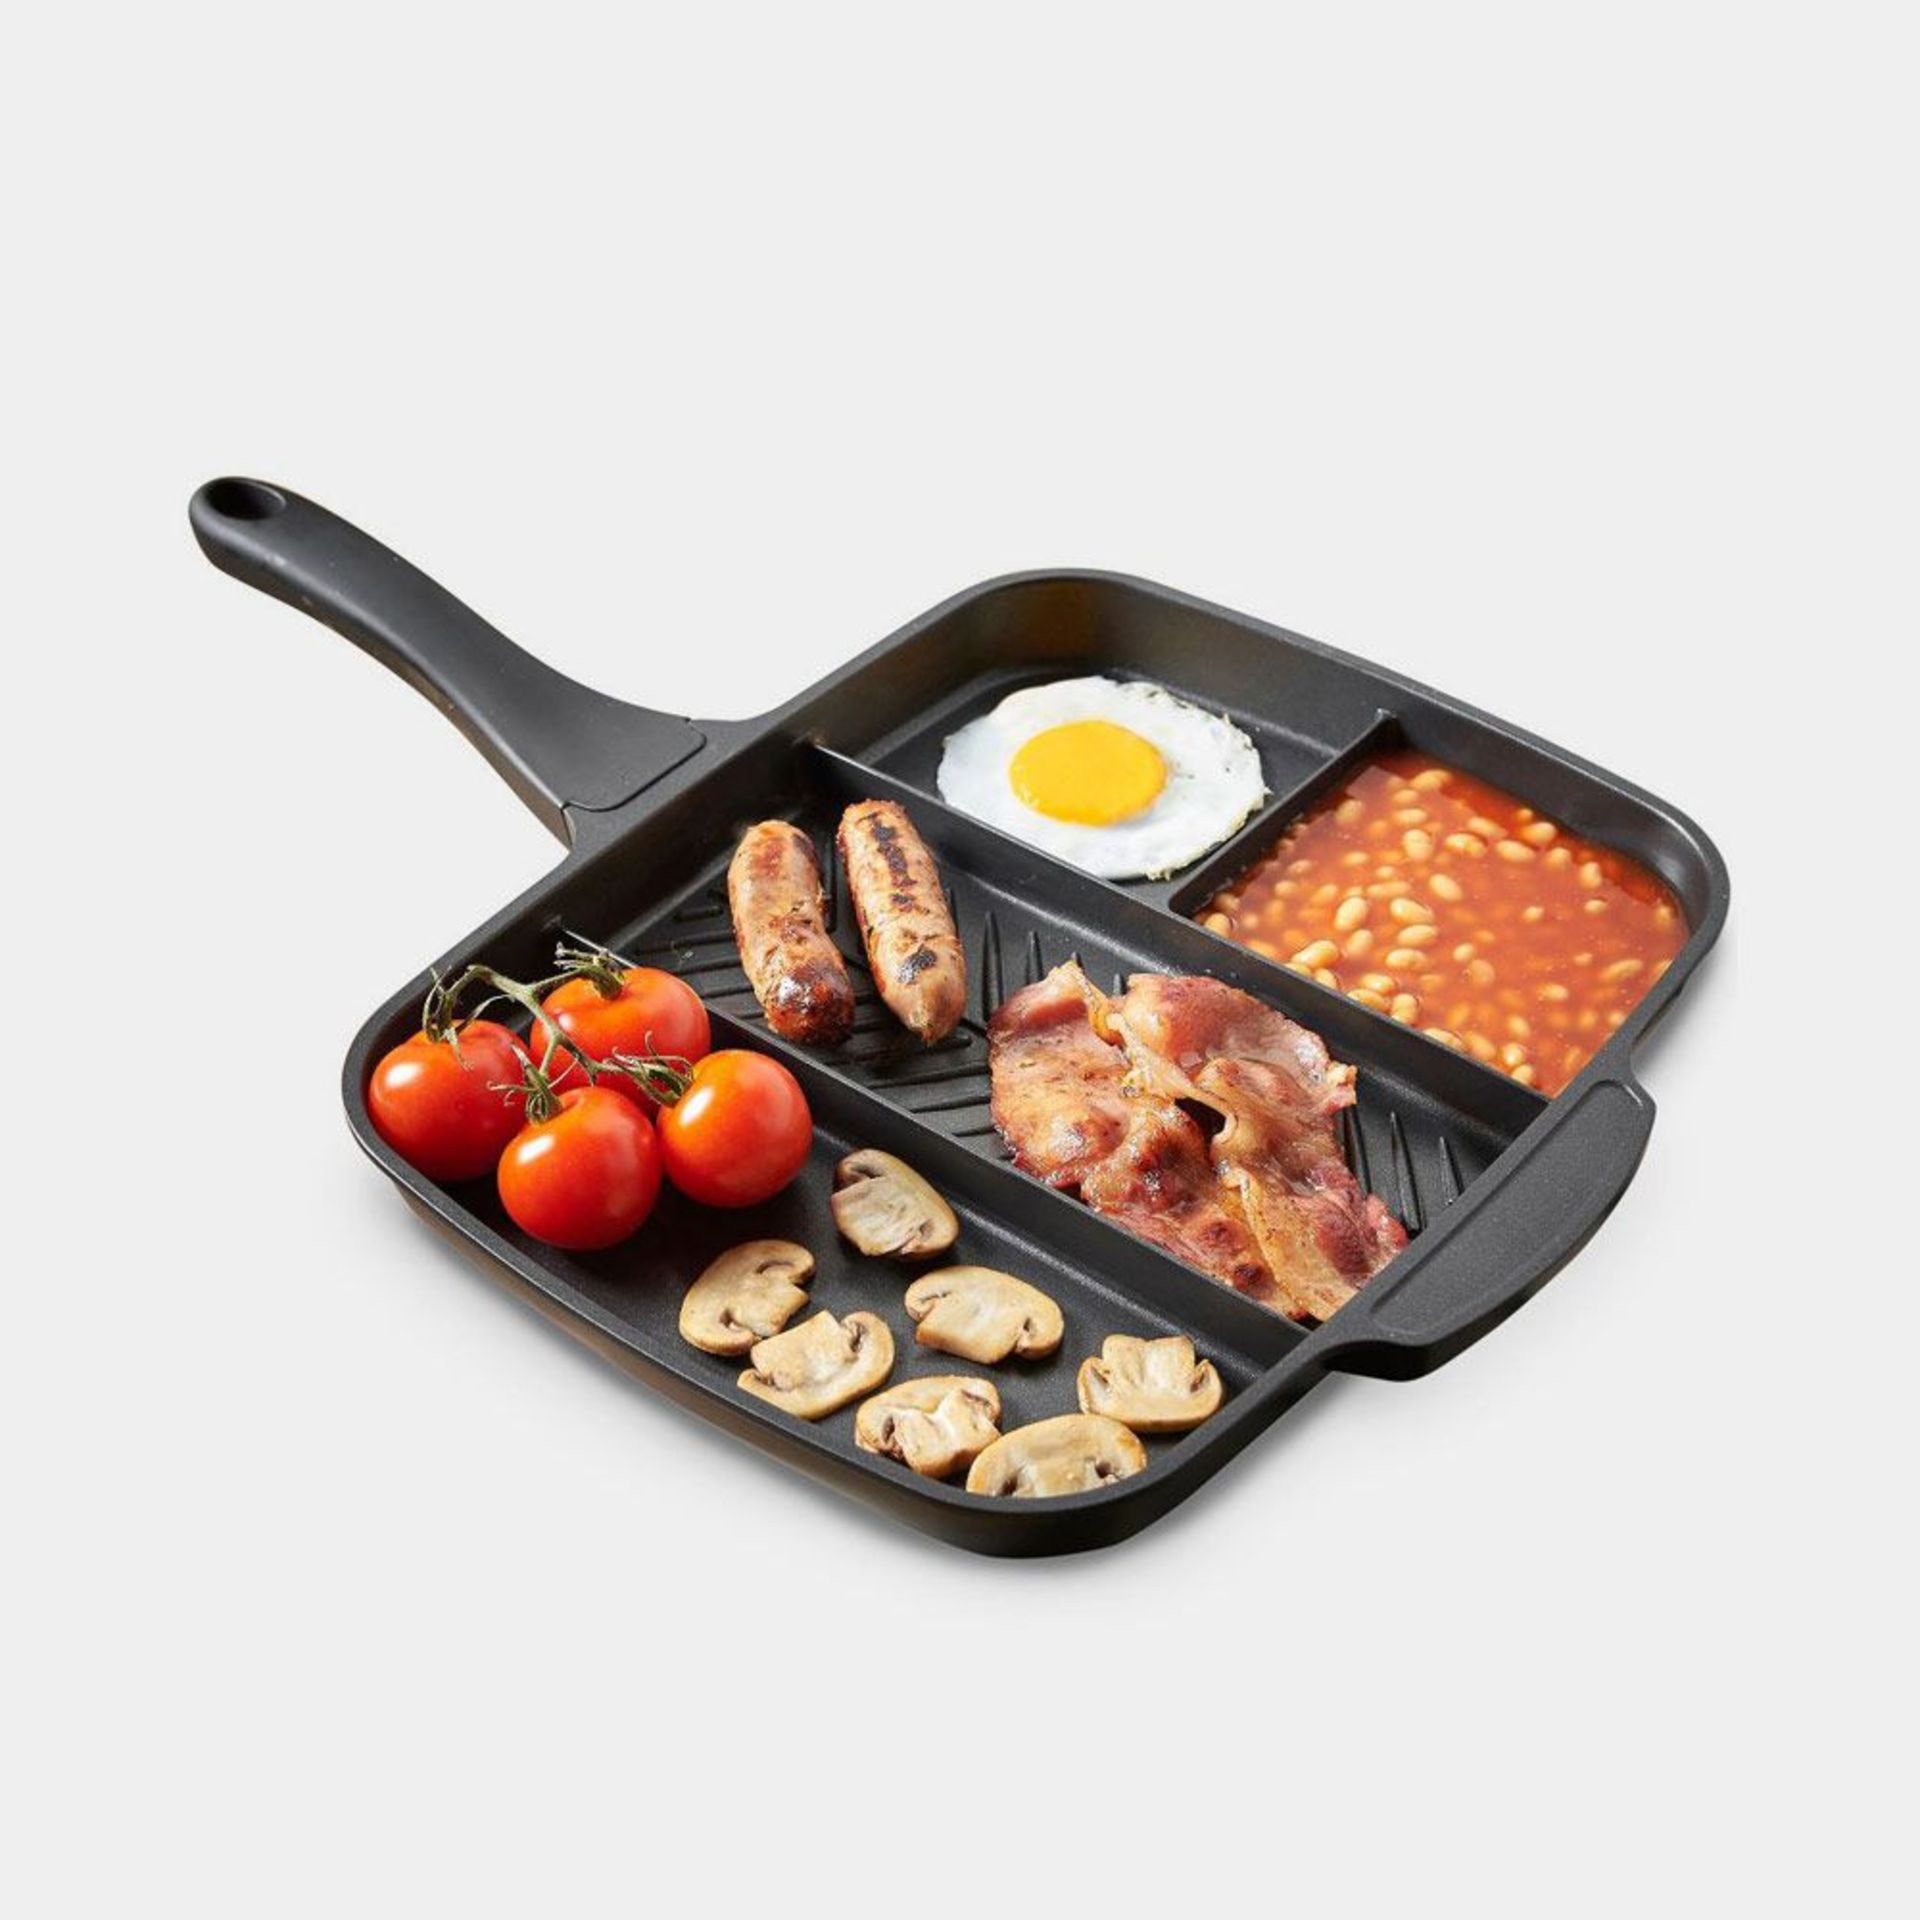 Multi Section Frying Pan. Four sections means you can cook multiple foods simultaneously – without